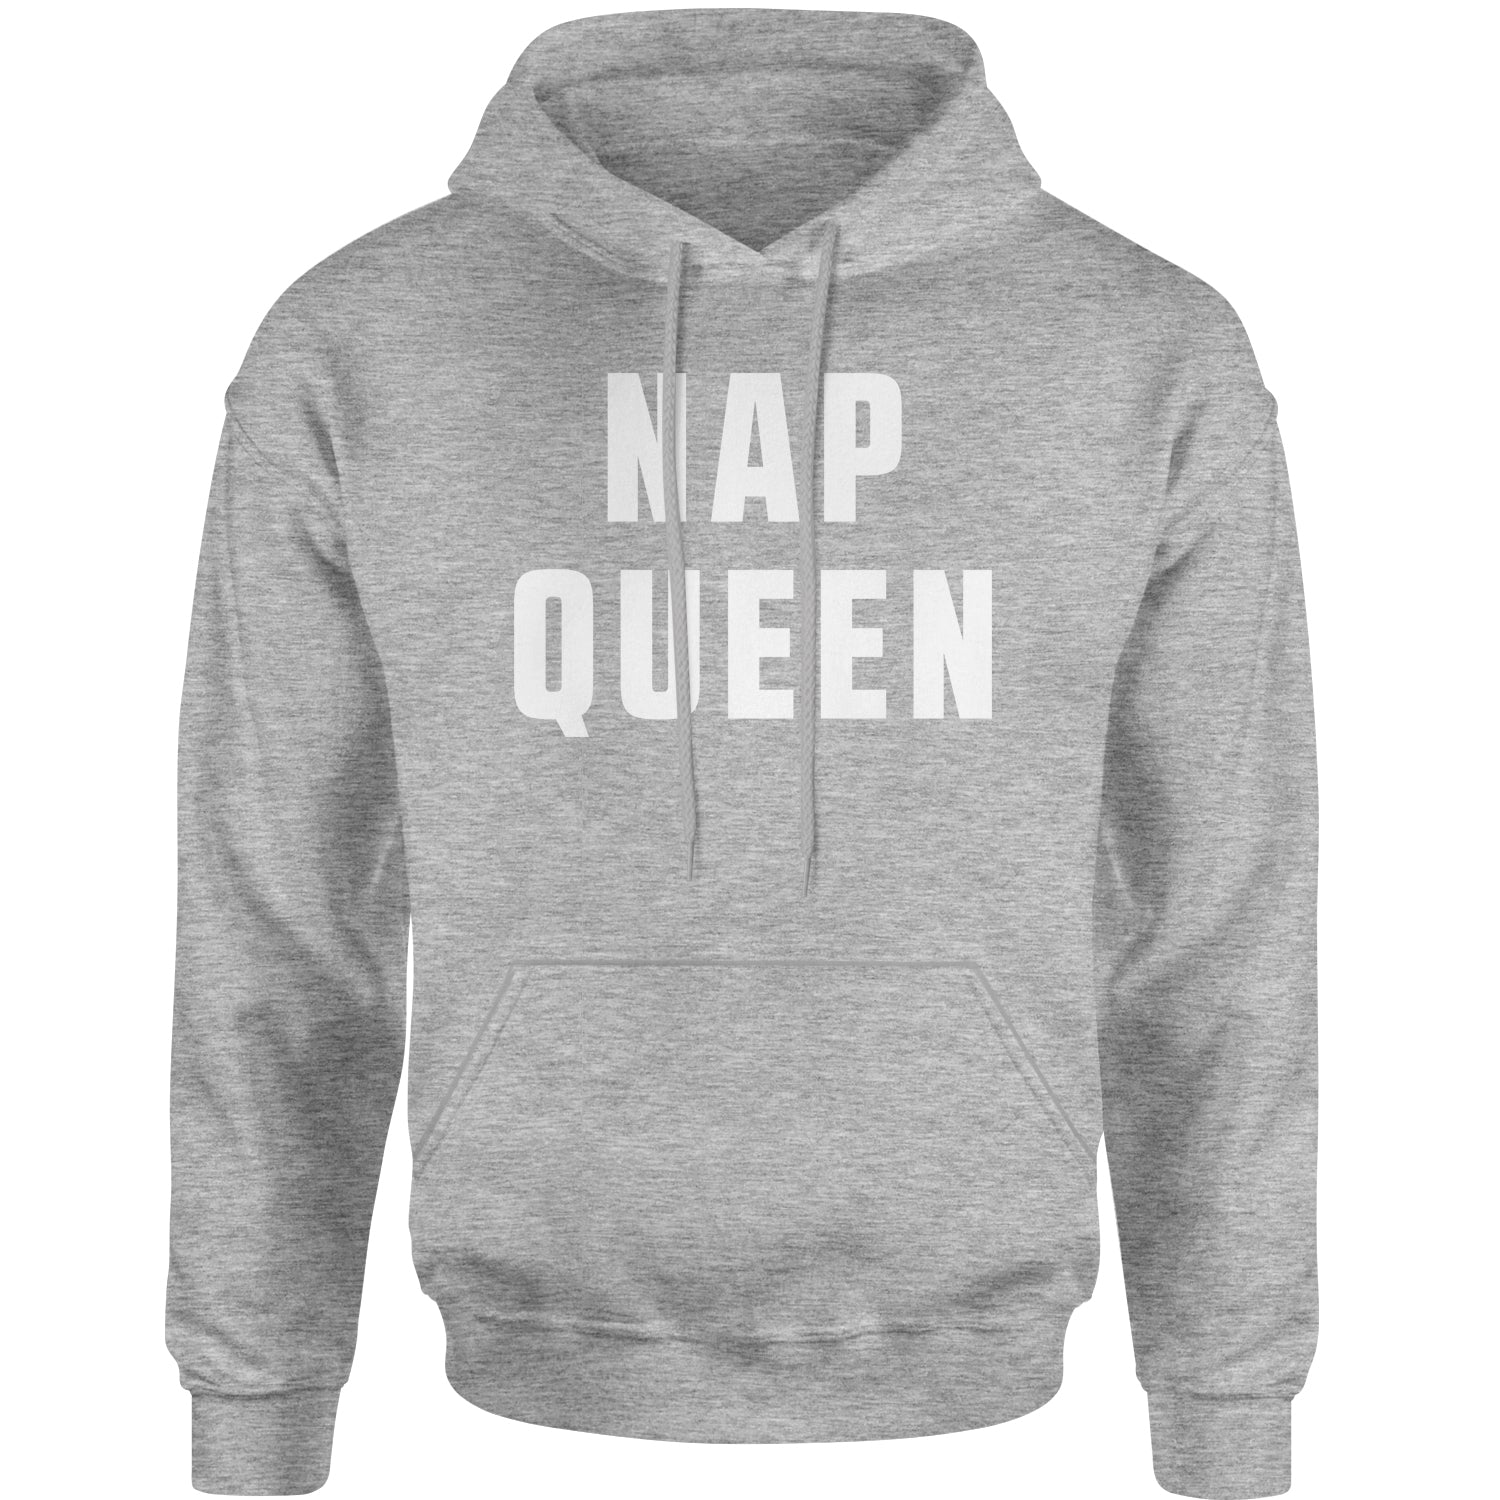 Nap Queen (White Print) Comfy Top For Lazy Days Adult Hoodie Sweatshirt all, day, function, lazy, nap, pajamas, queen, siesta, sleep, tired, to, too by Expression Tees